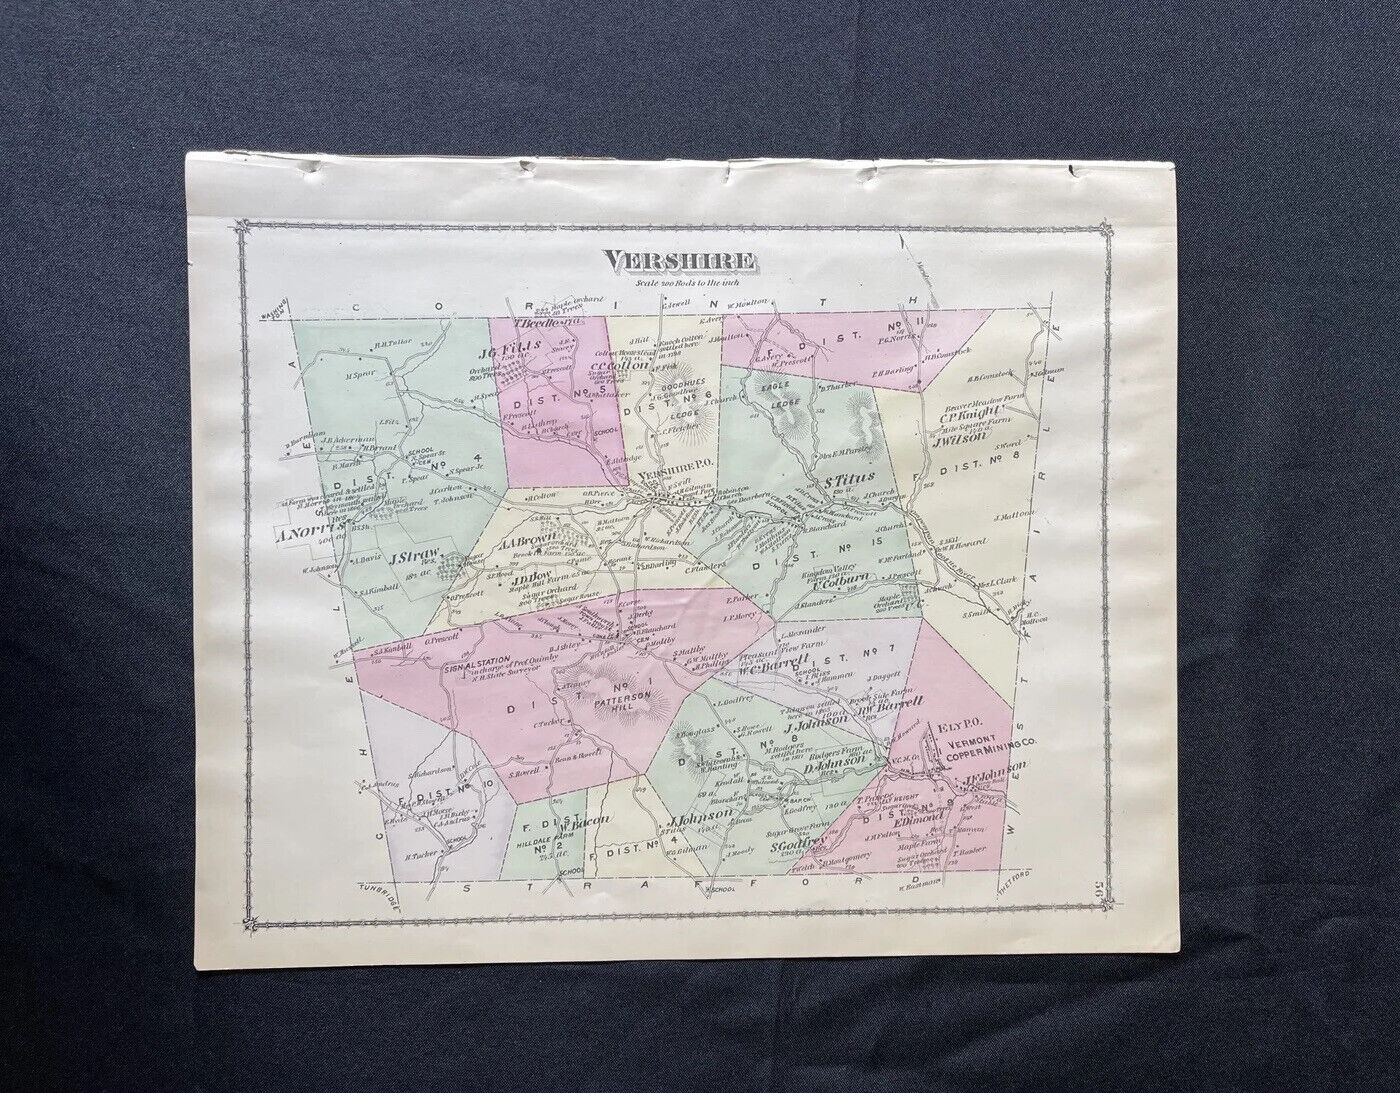 1877 Antique Map of Vershire Vermont Color Map VT by FW Beers ORIGINAL